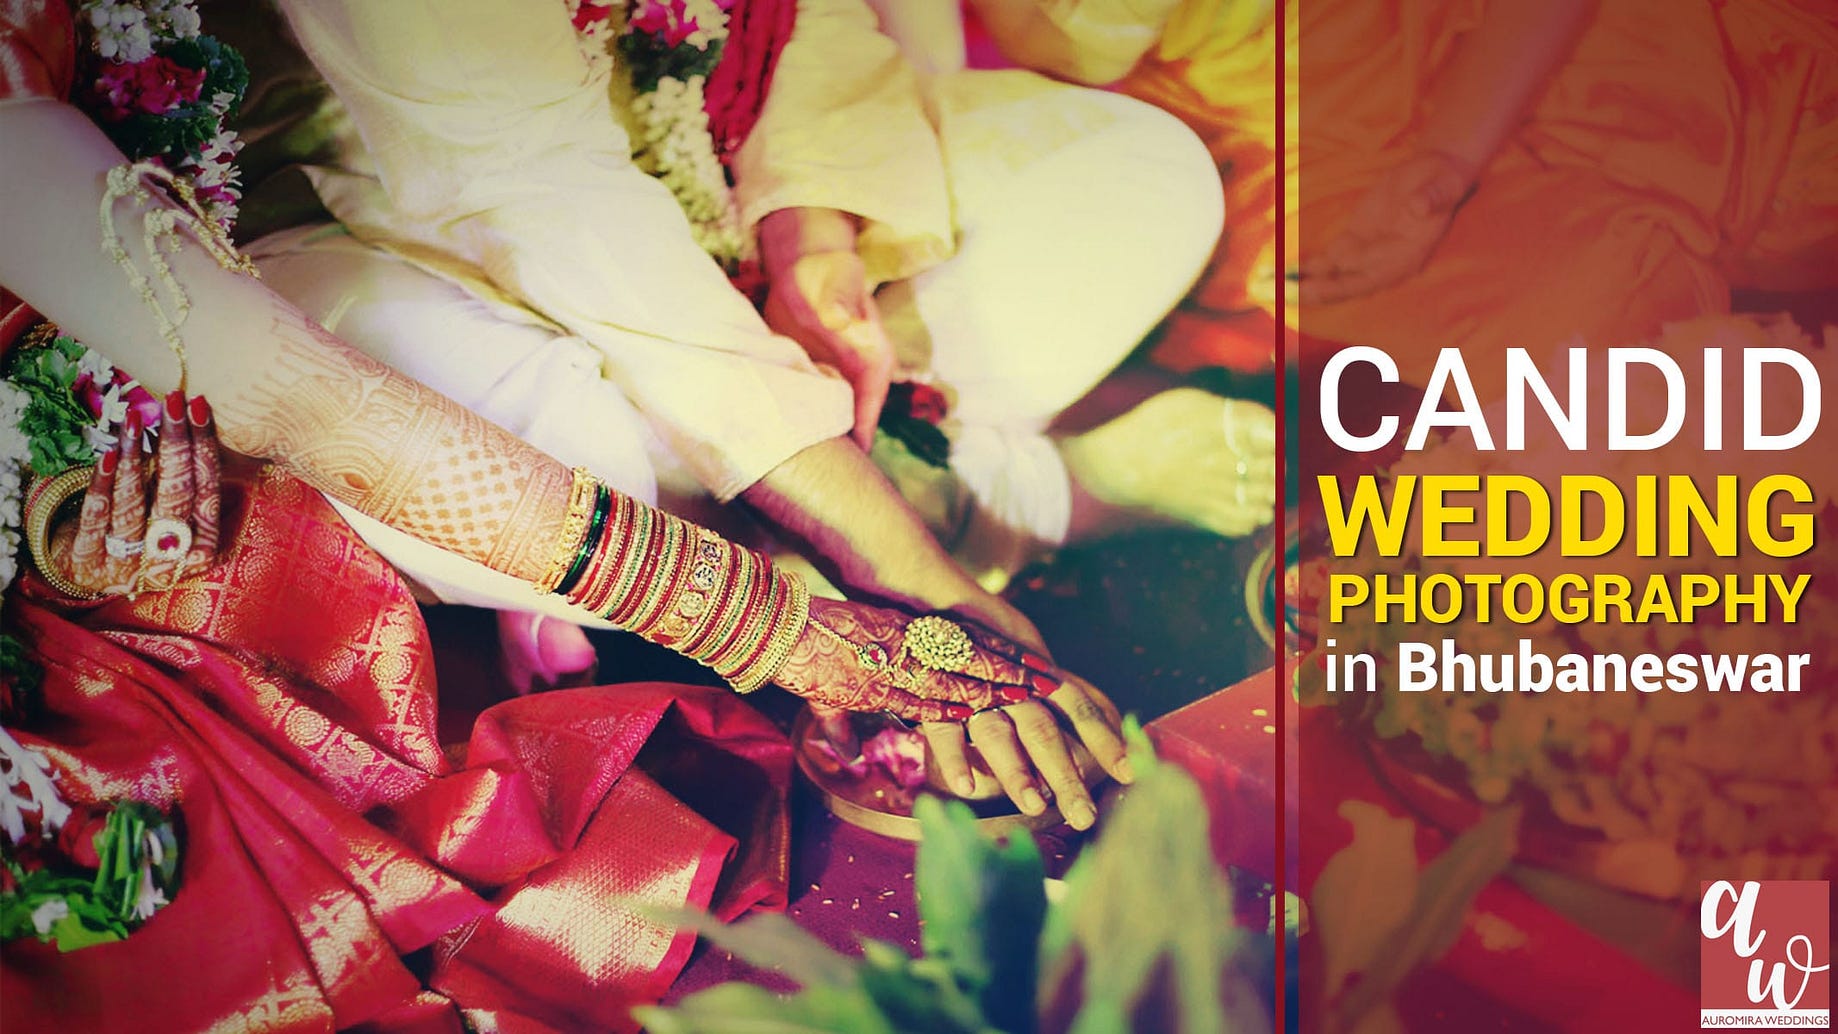 5 Interesting And Playful Wedding Rituals In India By Auromira Weddings Medium